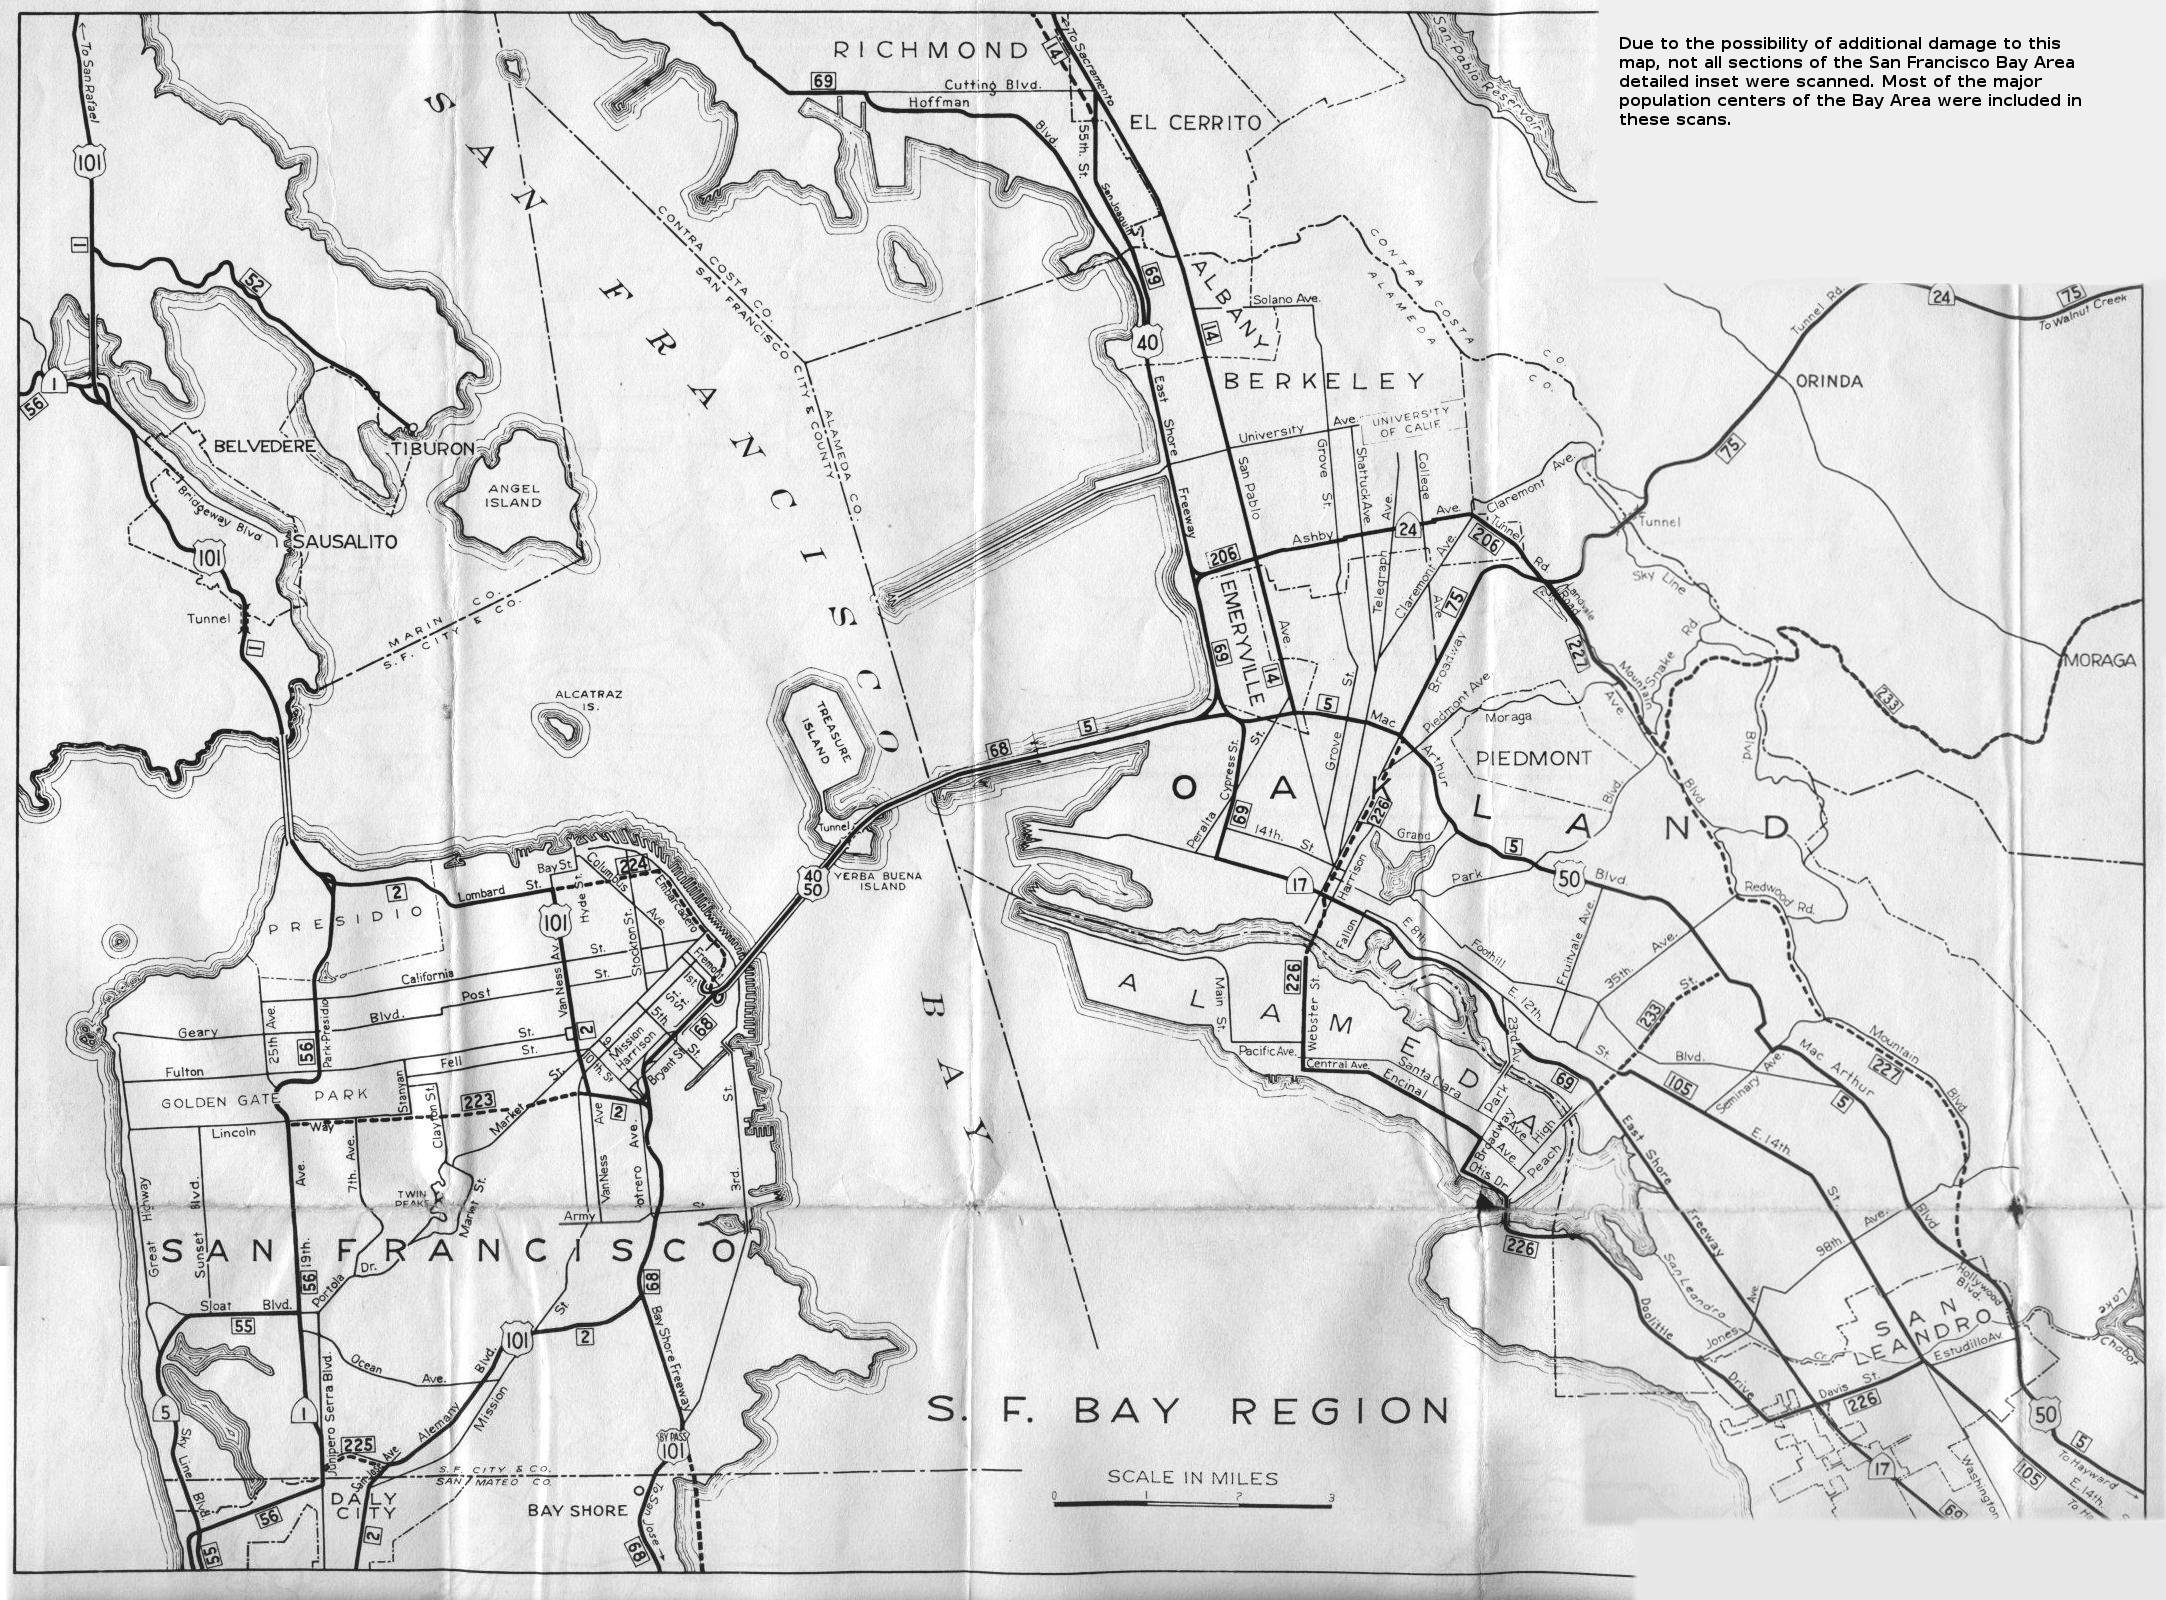 Official detail map for the San Francisco Bay Region (1956)